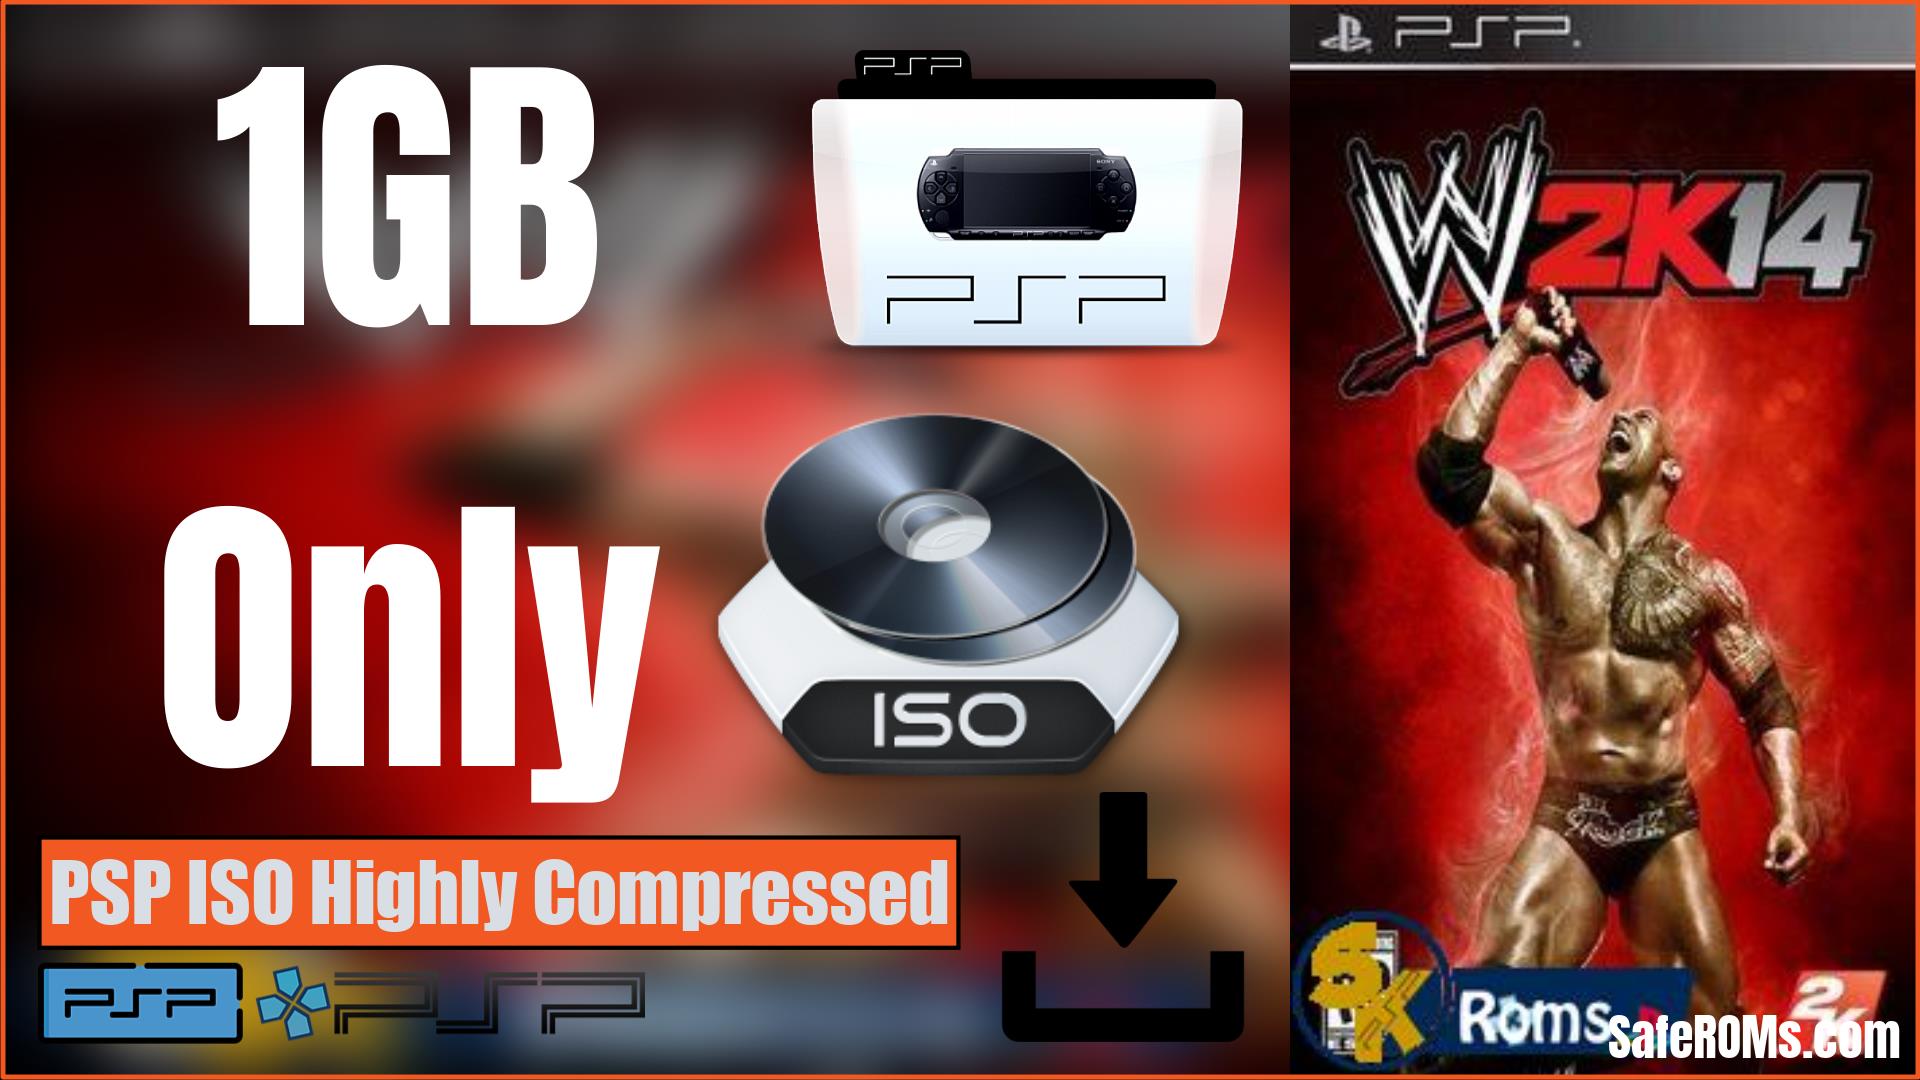 WWE 2K14 SmackDown vs. Raw PSP ISO Highly Compressed Download